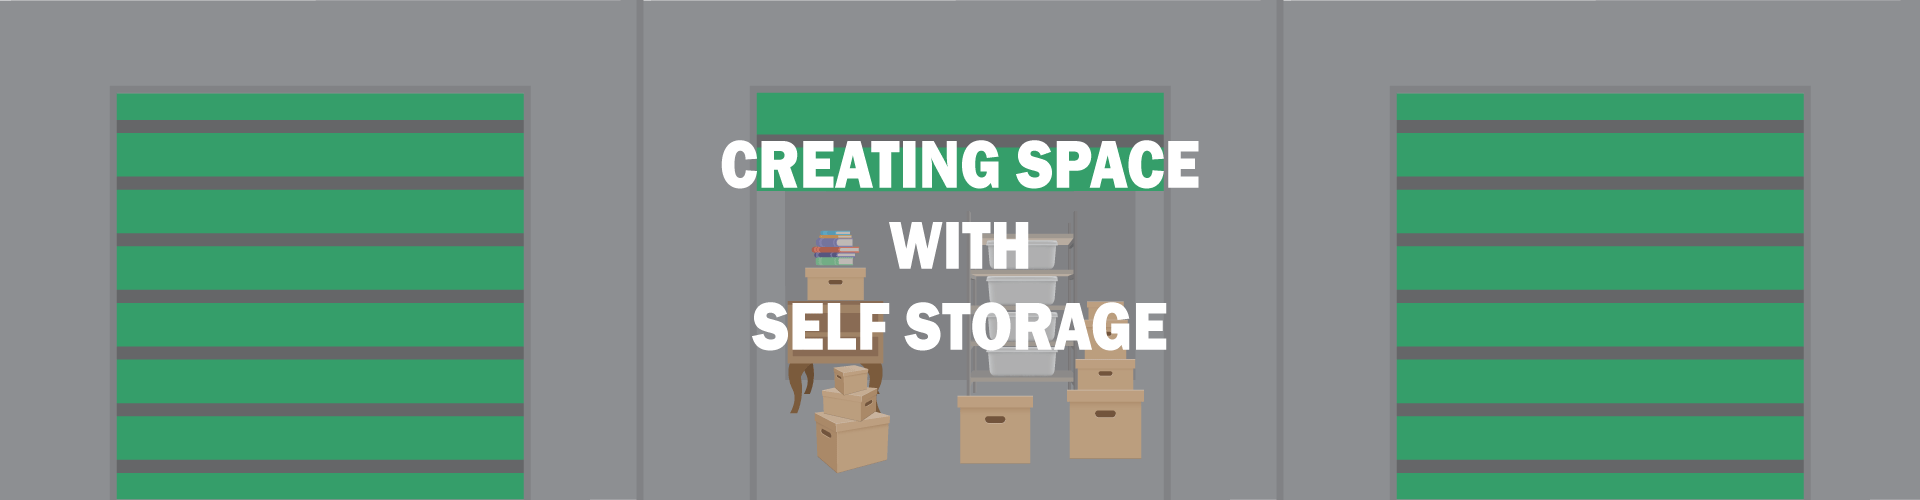 Create Space With Storage feature image